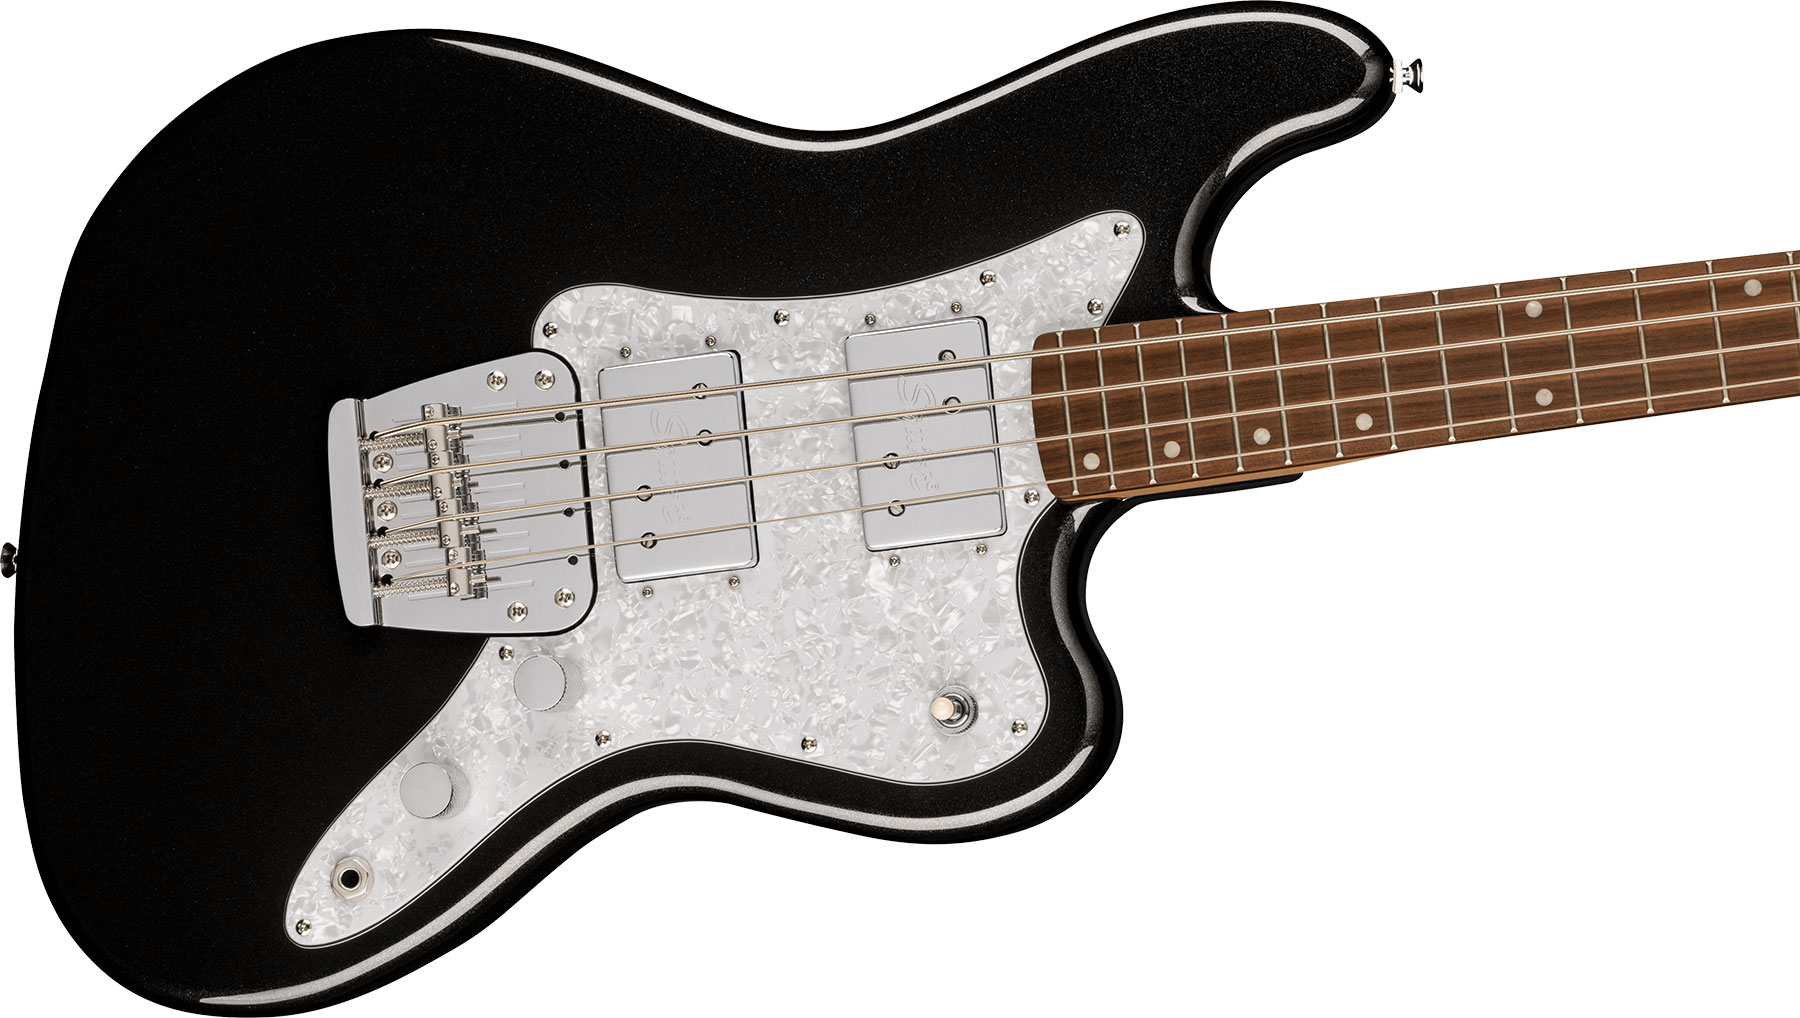 Squier Rascal Bass Hh Paranormal 2h Lau - Metallic Black - Solid body electric bass - Variation 2